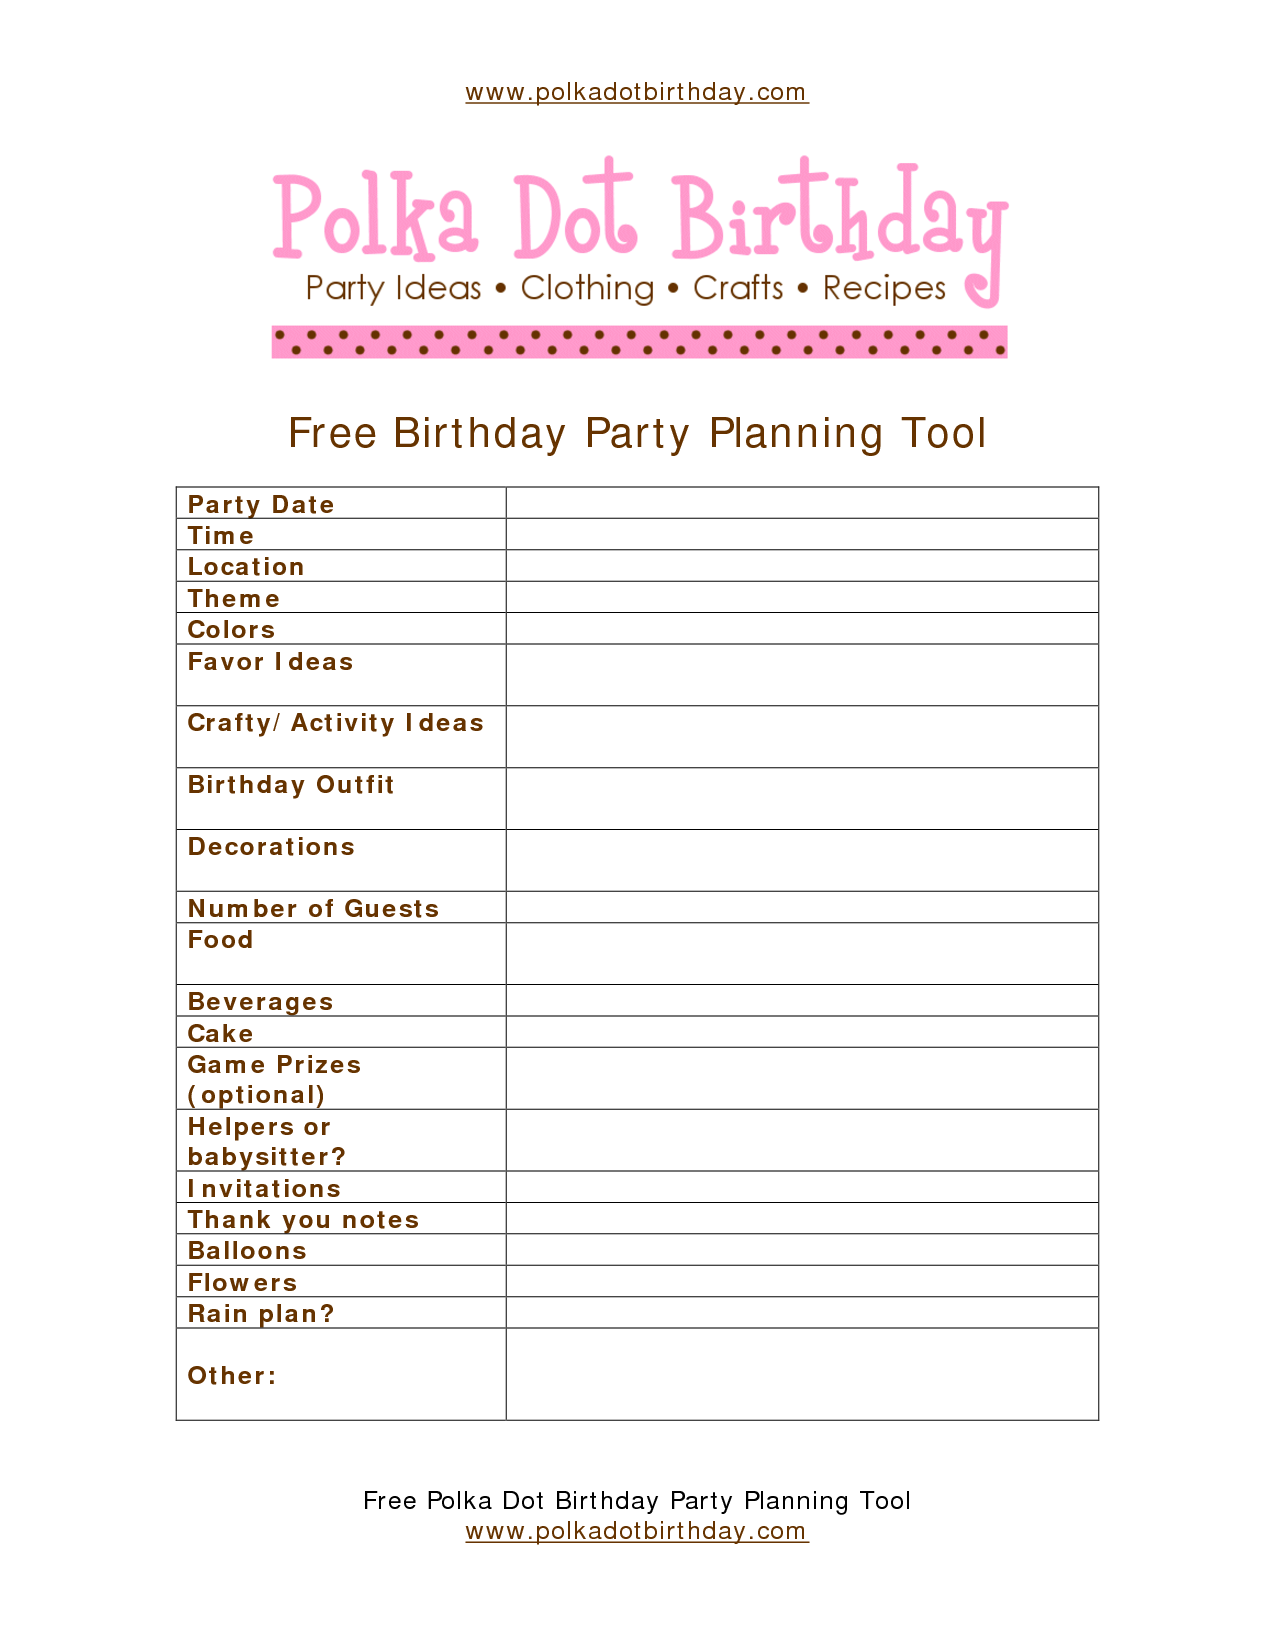 4-best-images-of-birthday-party-guest-list-printable-free-printable